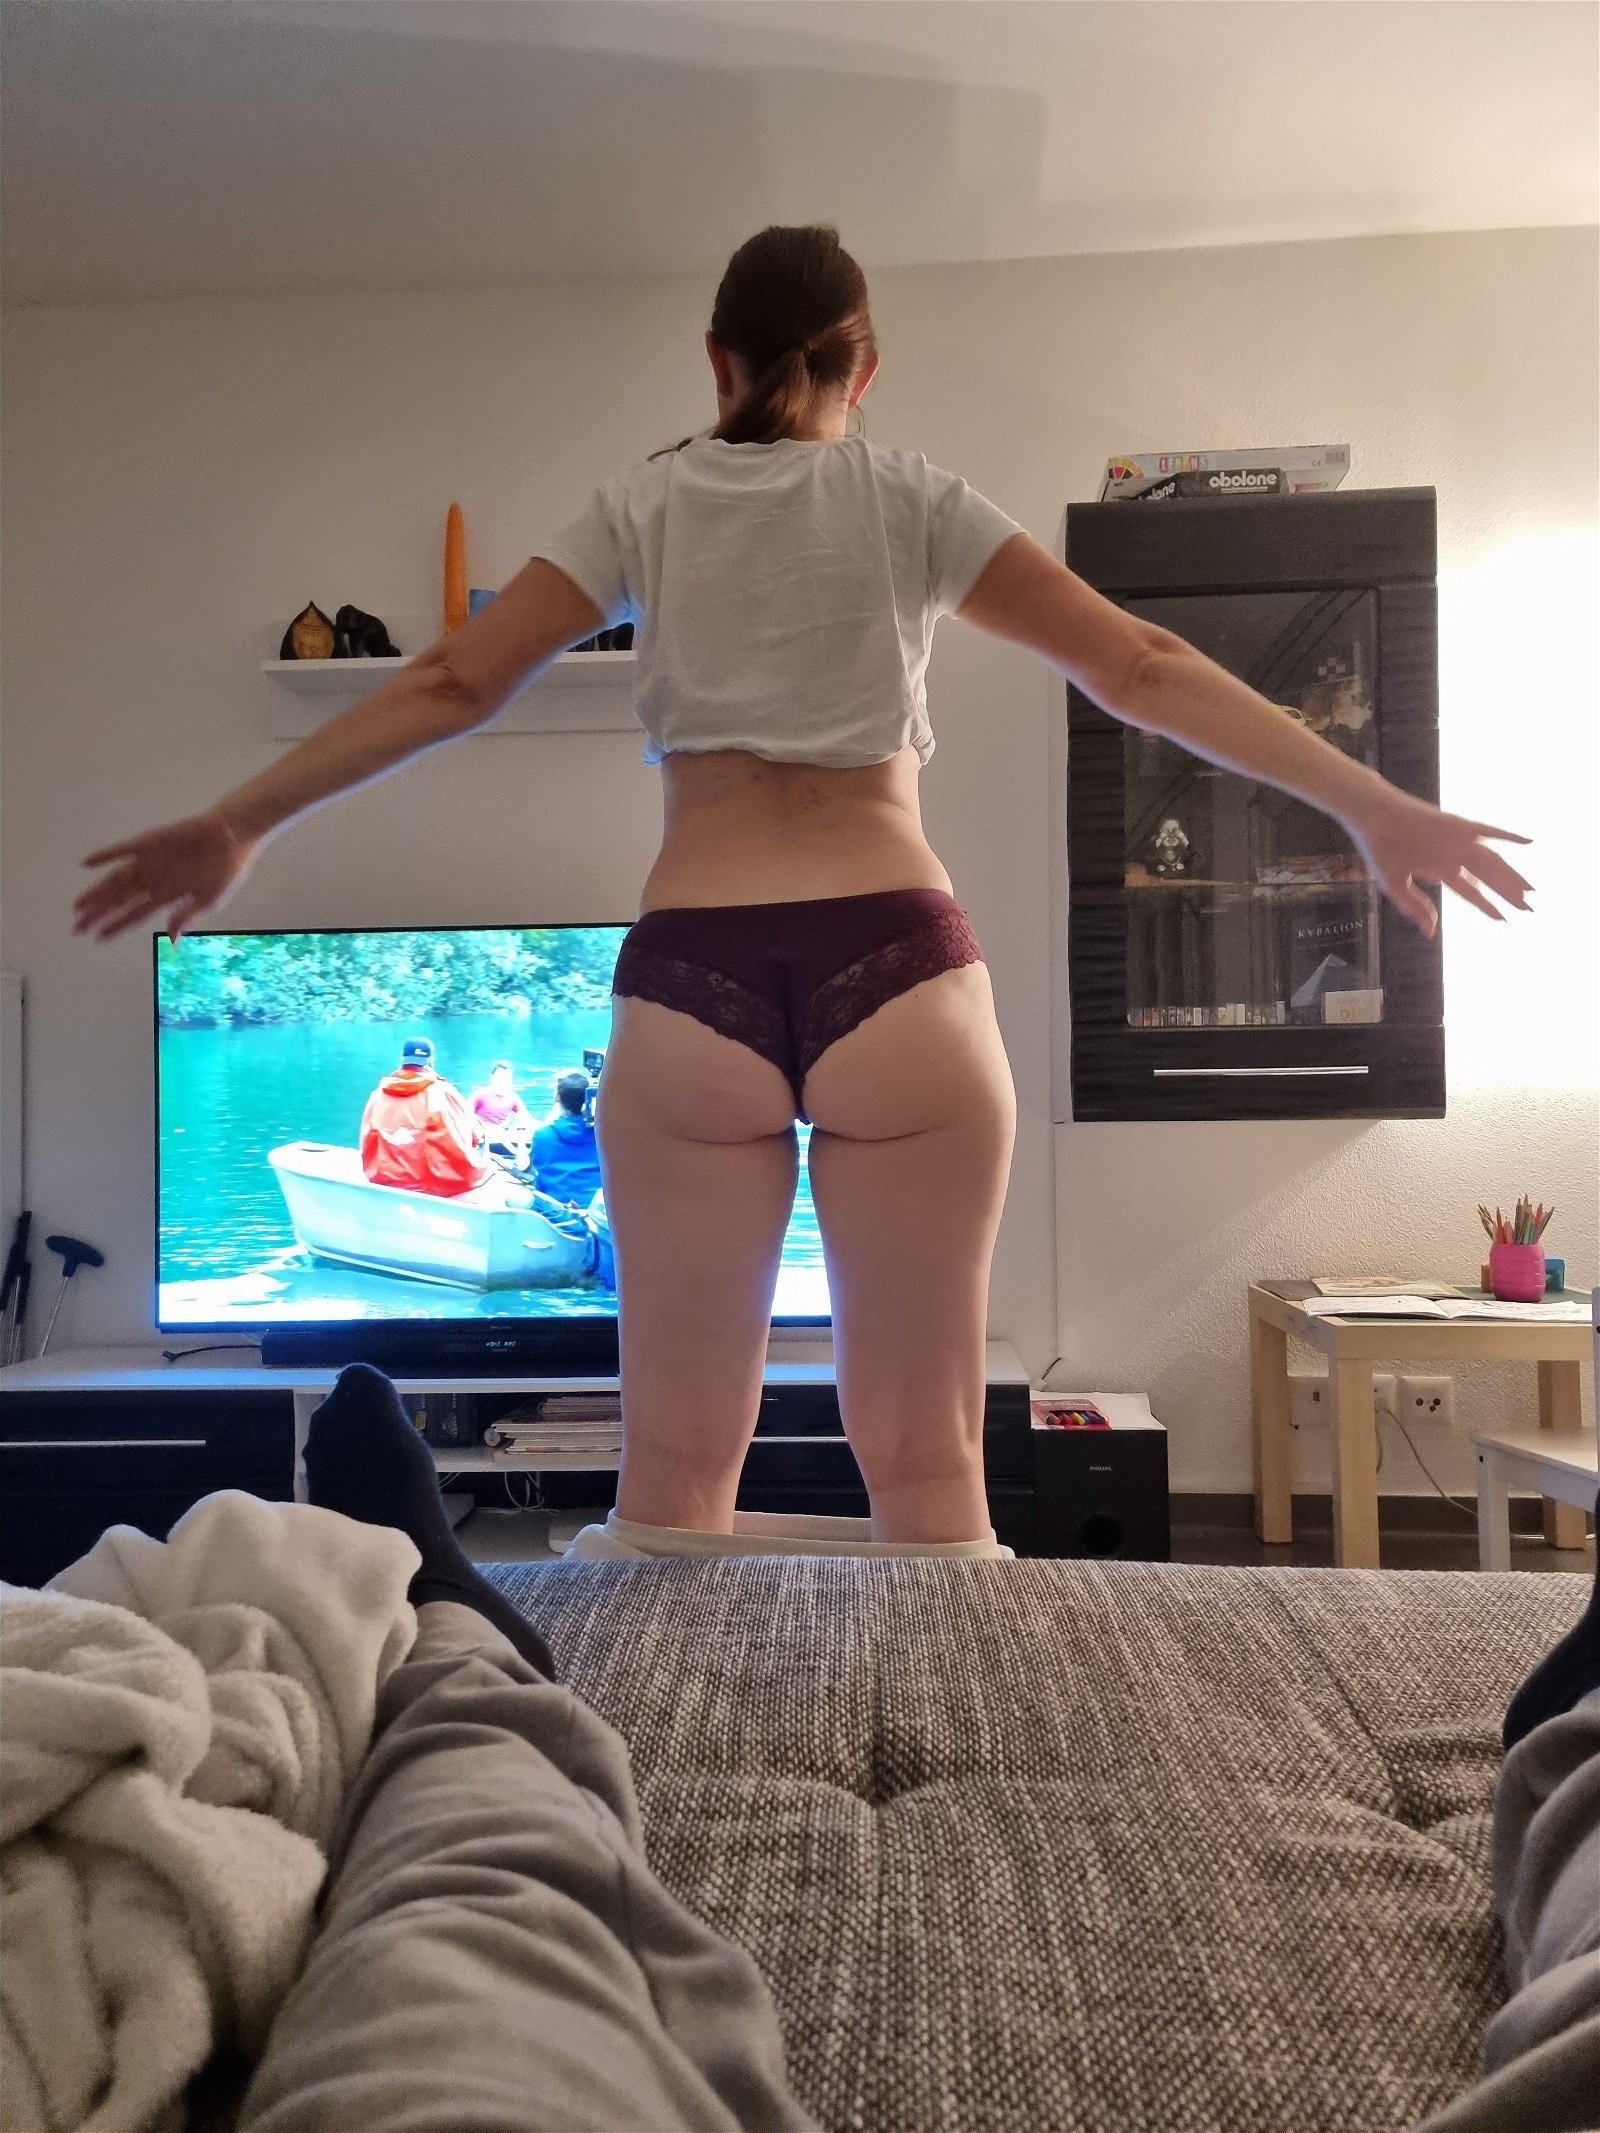 Watch the Photo by doublea1986 with the username @doublea1986, posted on July 8, 2022. The post is about the topic Underwear. and the text says 'Ihr fitnesstraining zahlt sich aus, geiler körper in sexy posen'